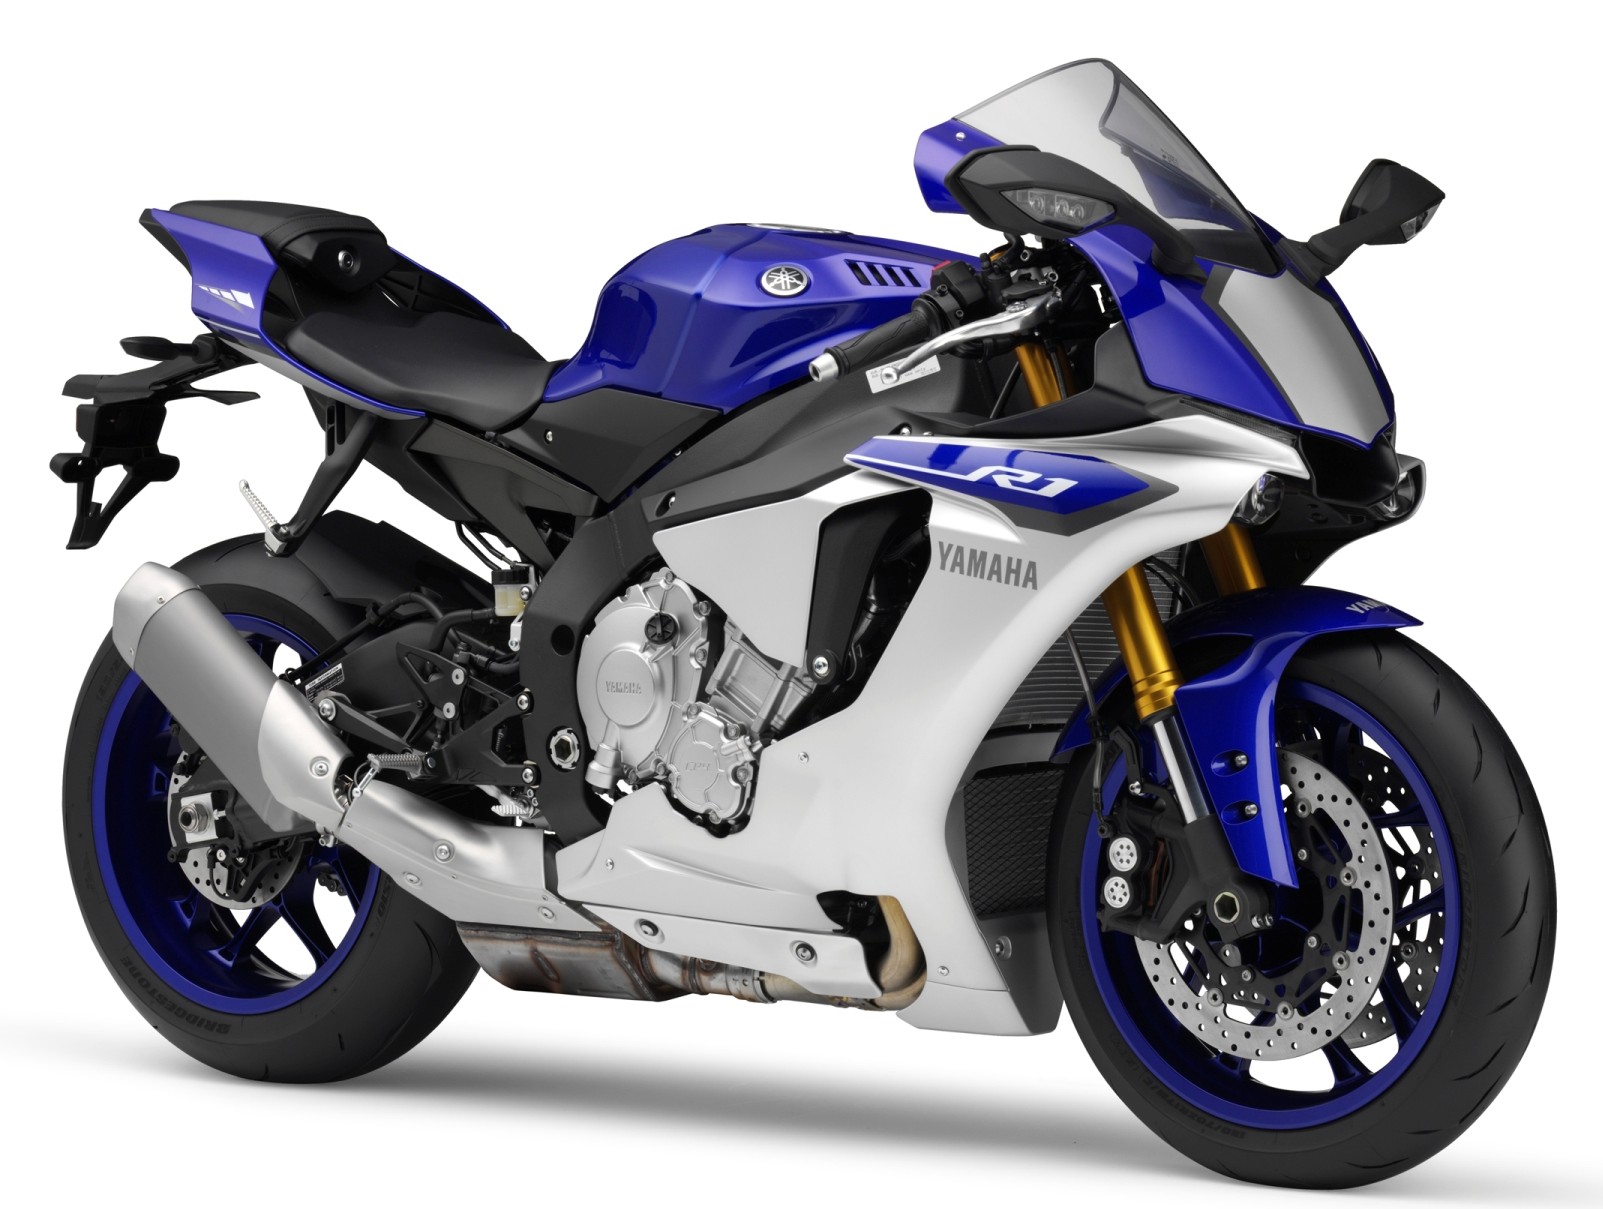 2015 Yamaha YZF R1 & R1M Launched in India: Prices, Details